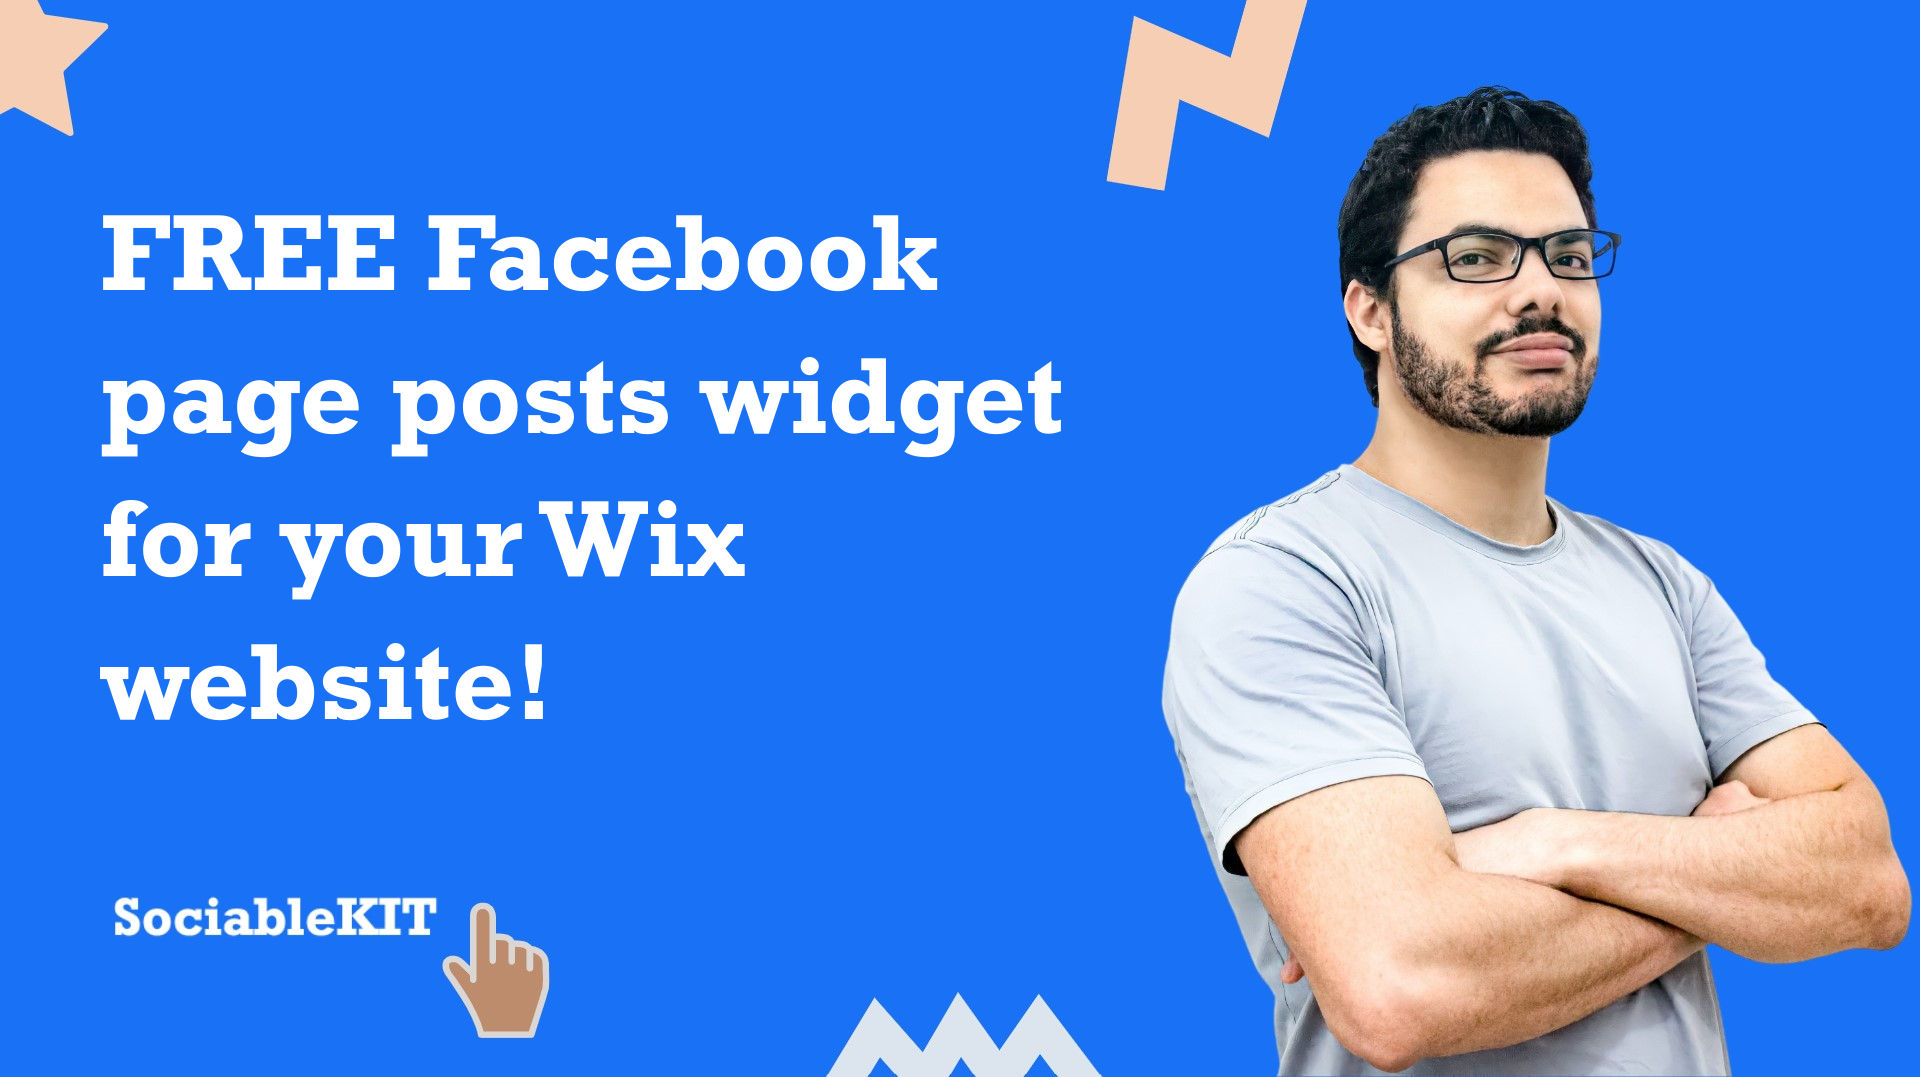 Free Facebook page posts widget for your Wix website